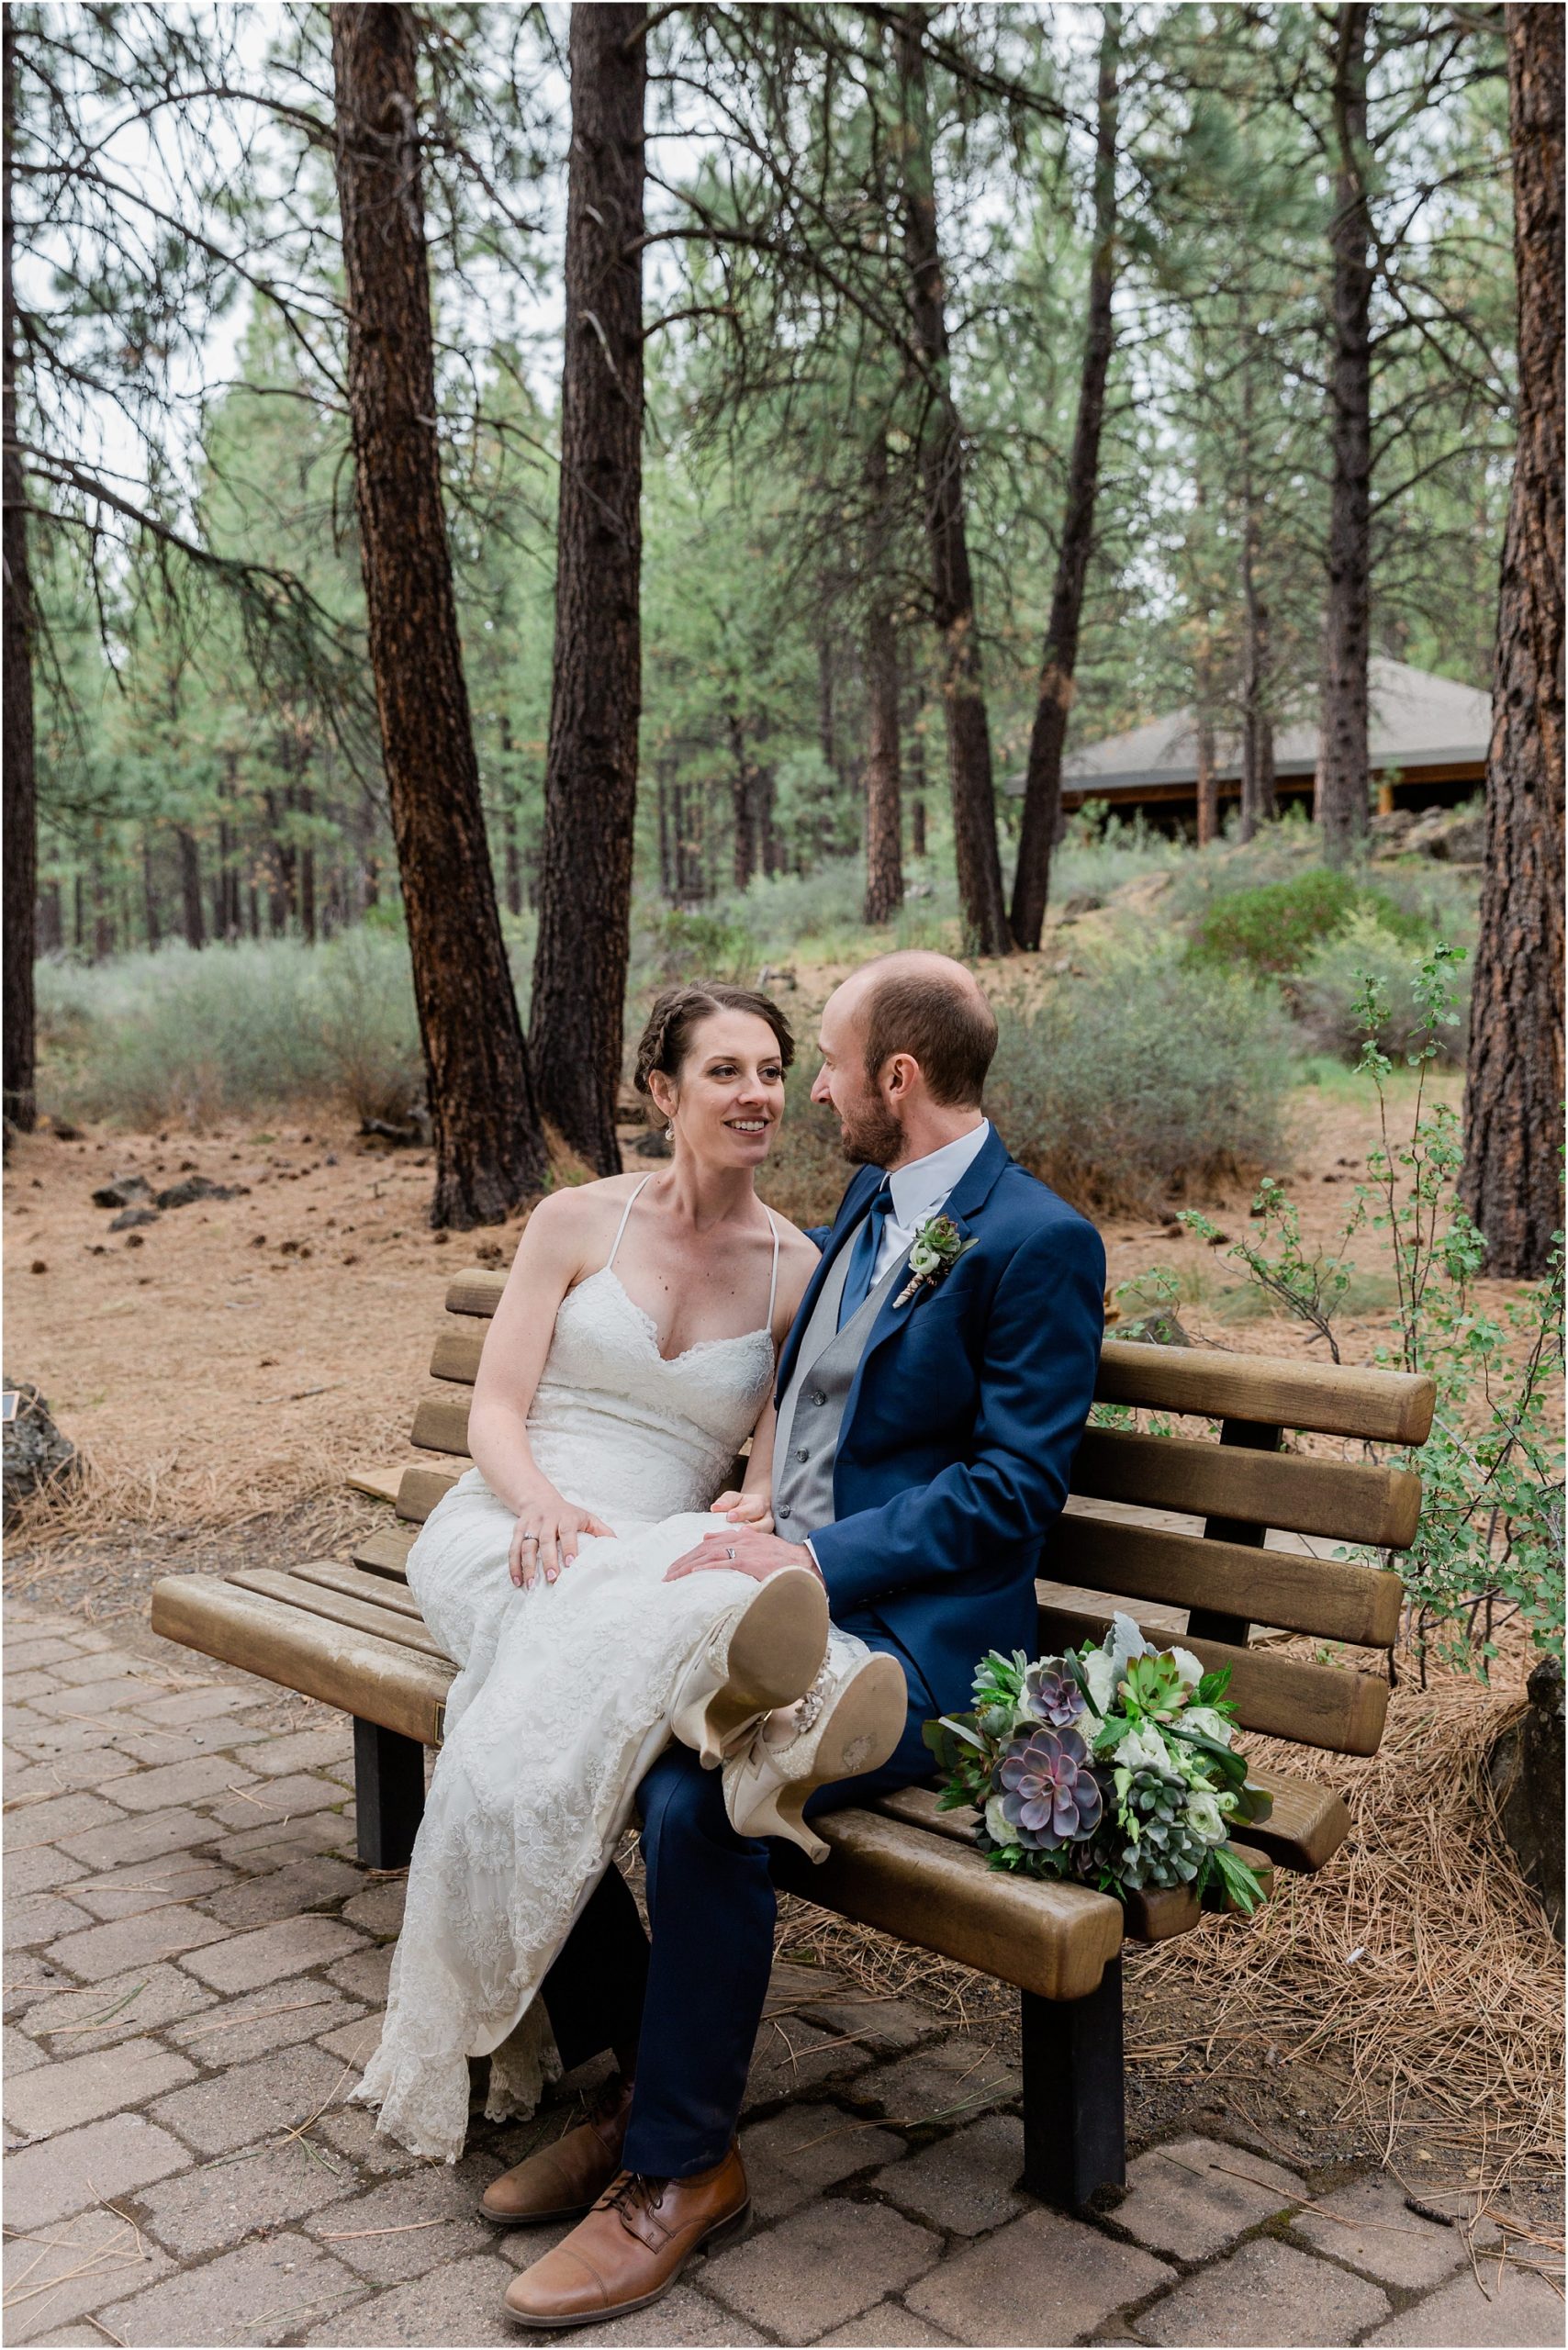 A bride relaxes with her feet on her groom's lap as they pose for their wedding portraits at this Oregon museum wedding venue. | Erica Swantek Photography